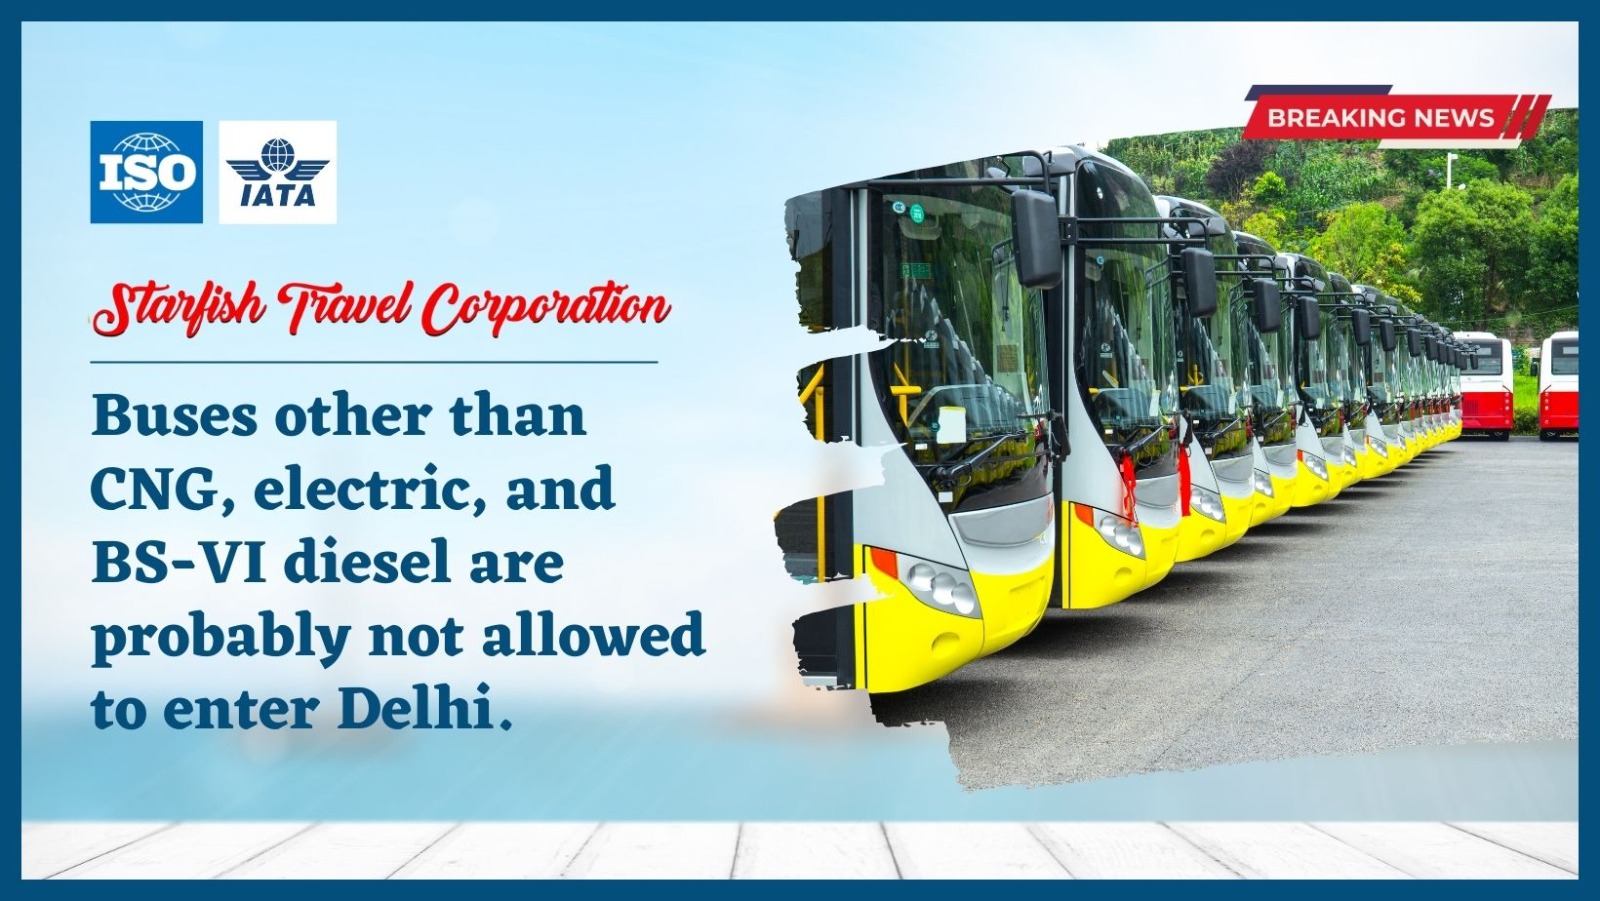 Buses other than CNG, electric, and BS-VI diesel are probably not allowed to enter Delhi.